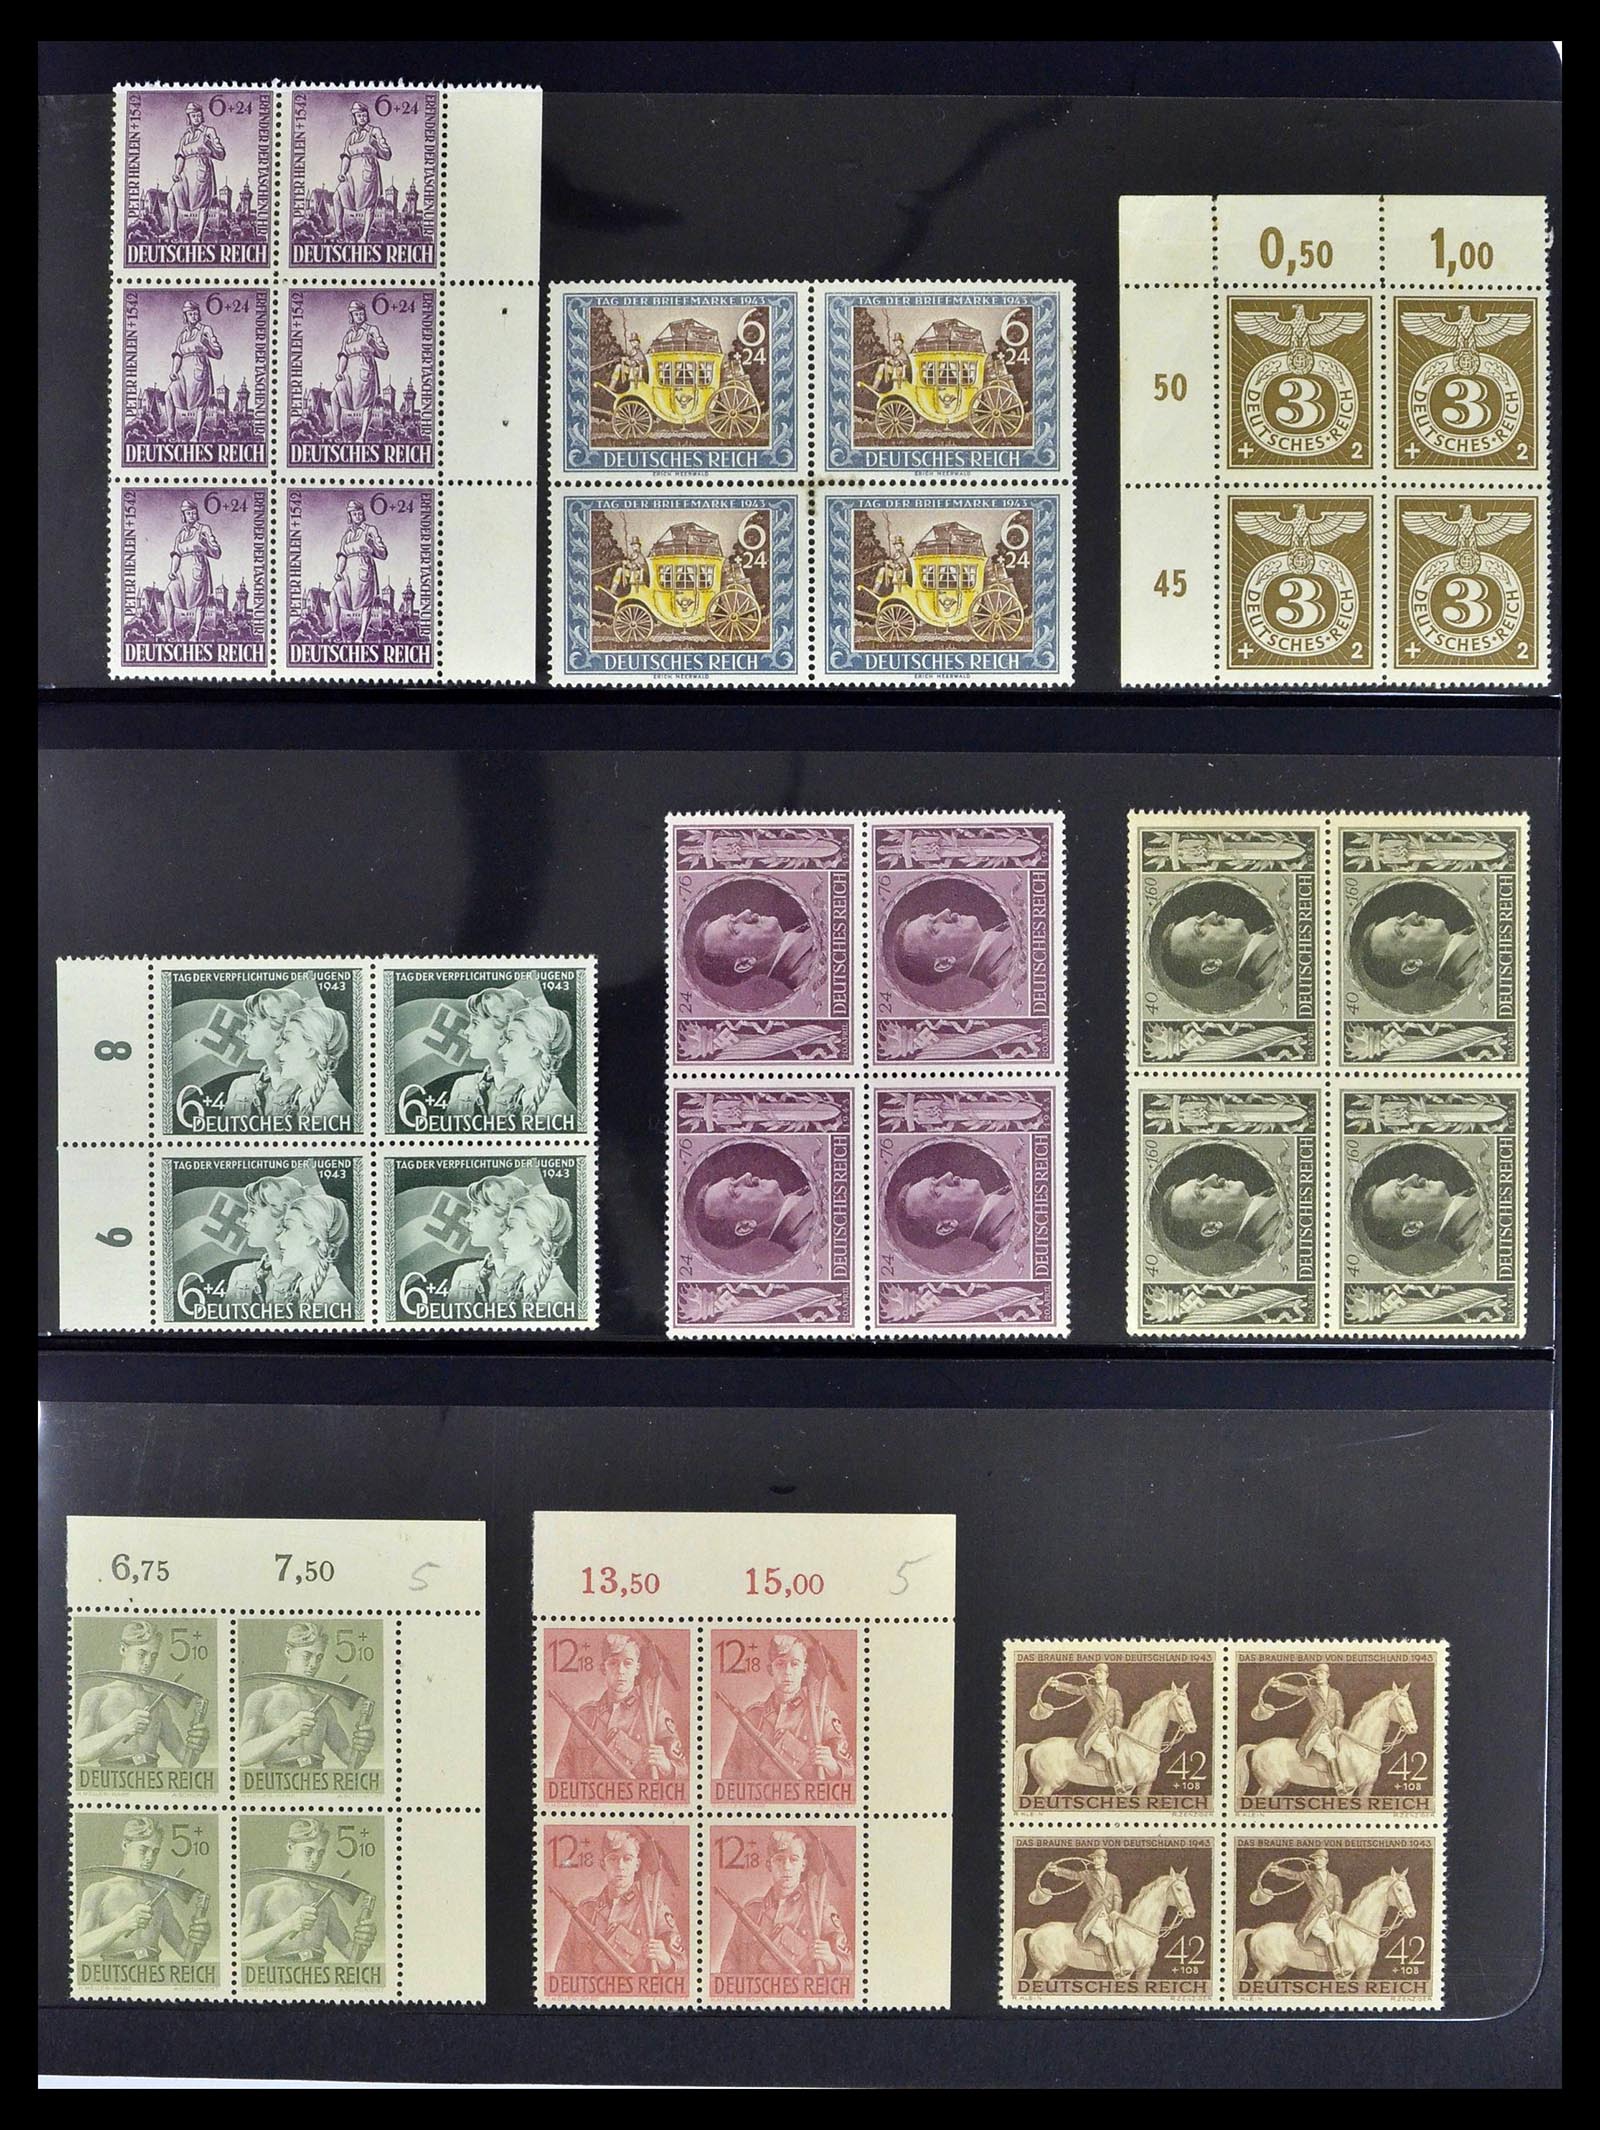 39255 0025 - Stamp collection 39255 German Reich MNH blocks of 4.